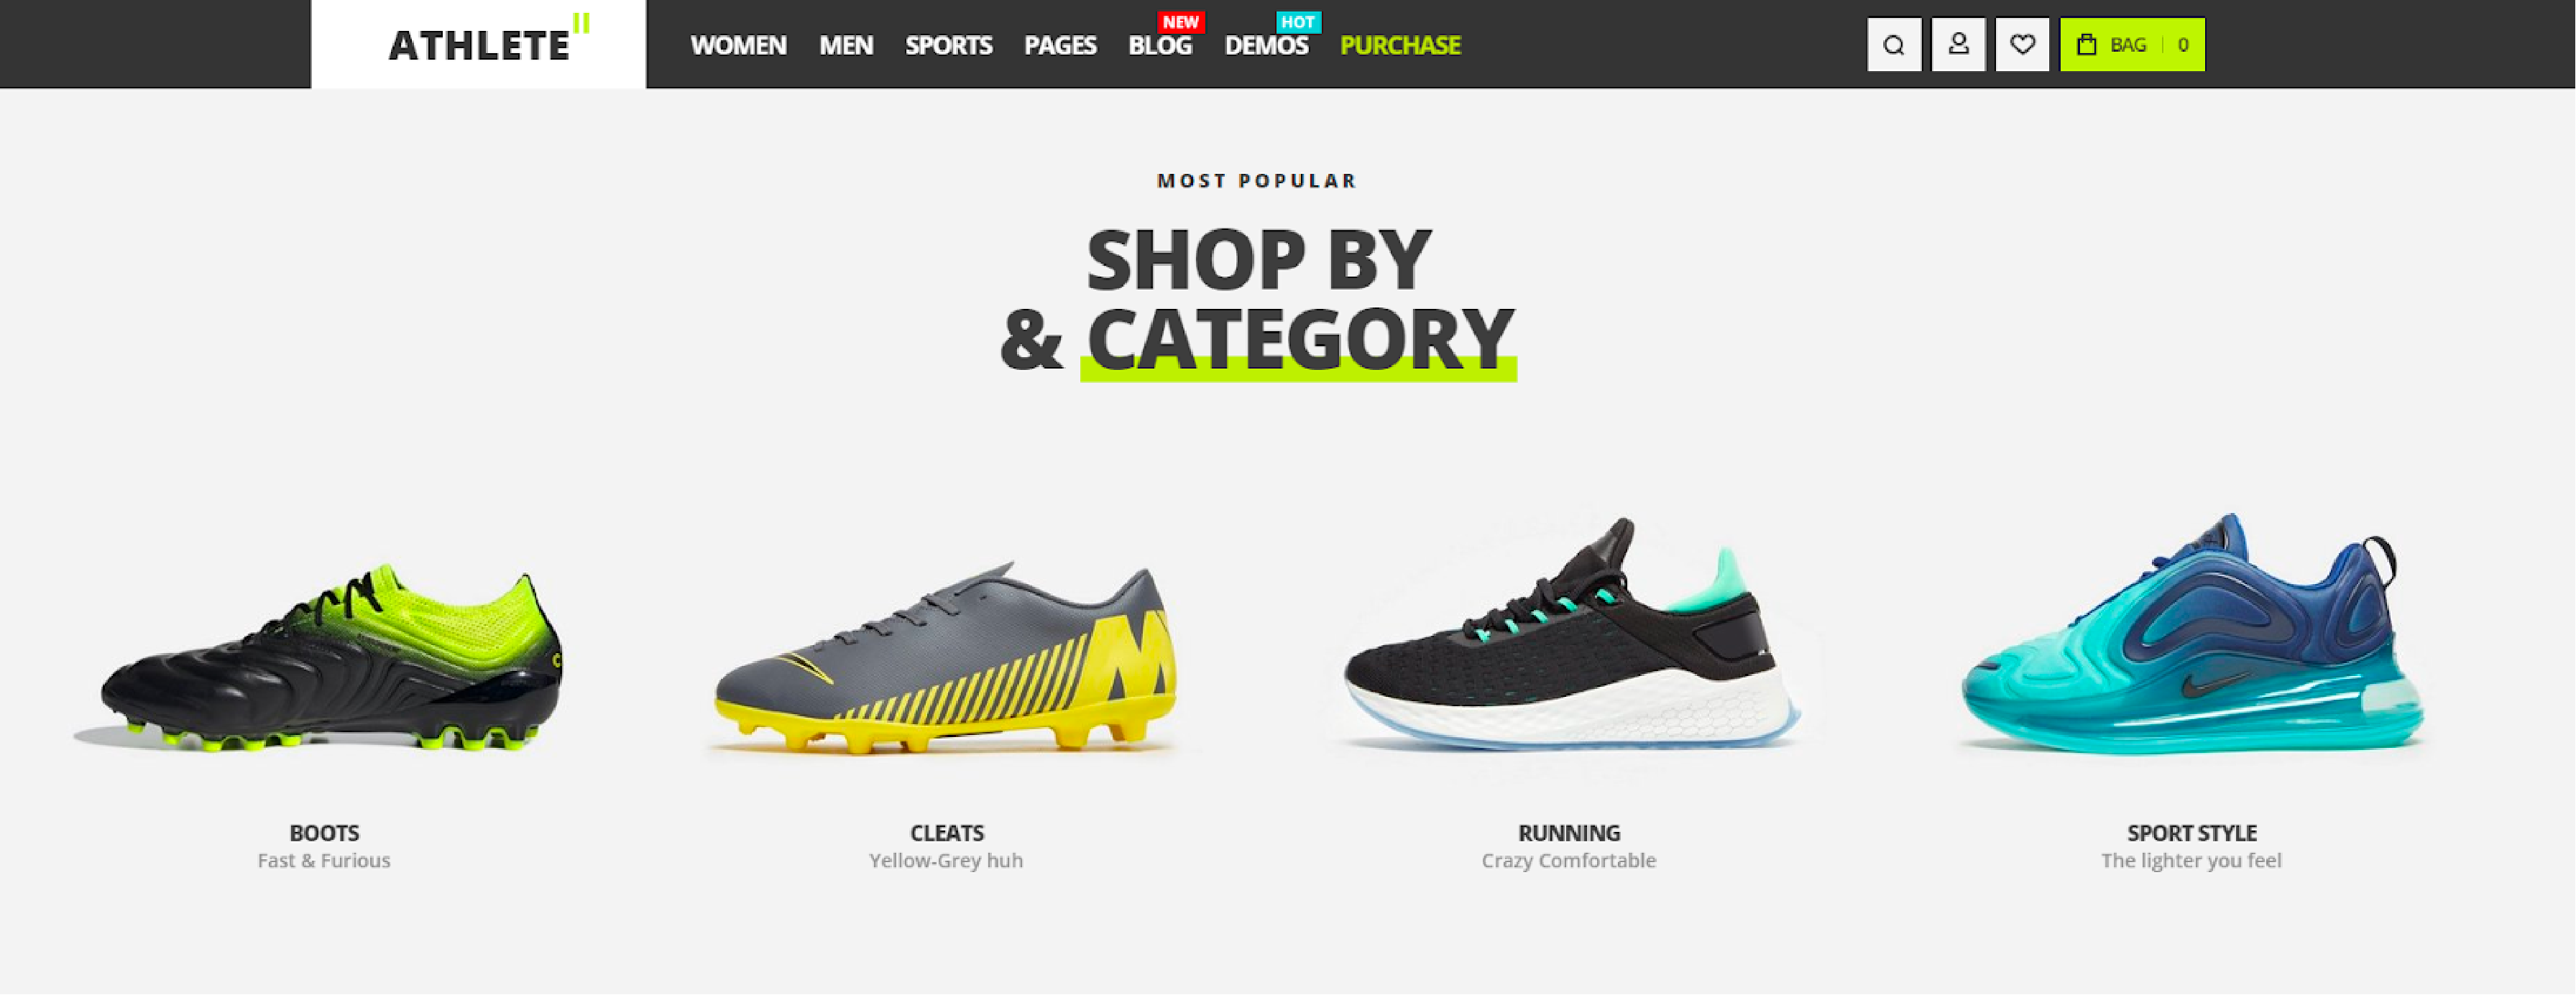 Athlete2 Magento theme with its powerful and versatile design features